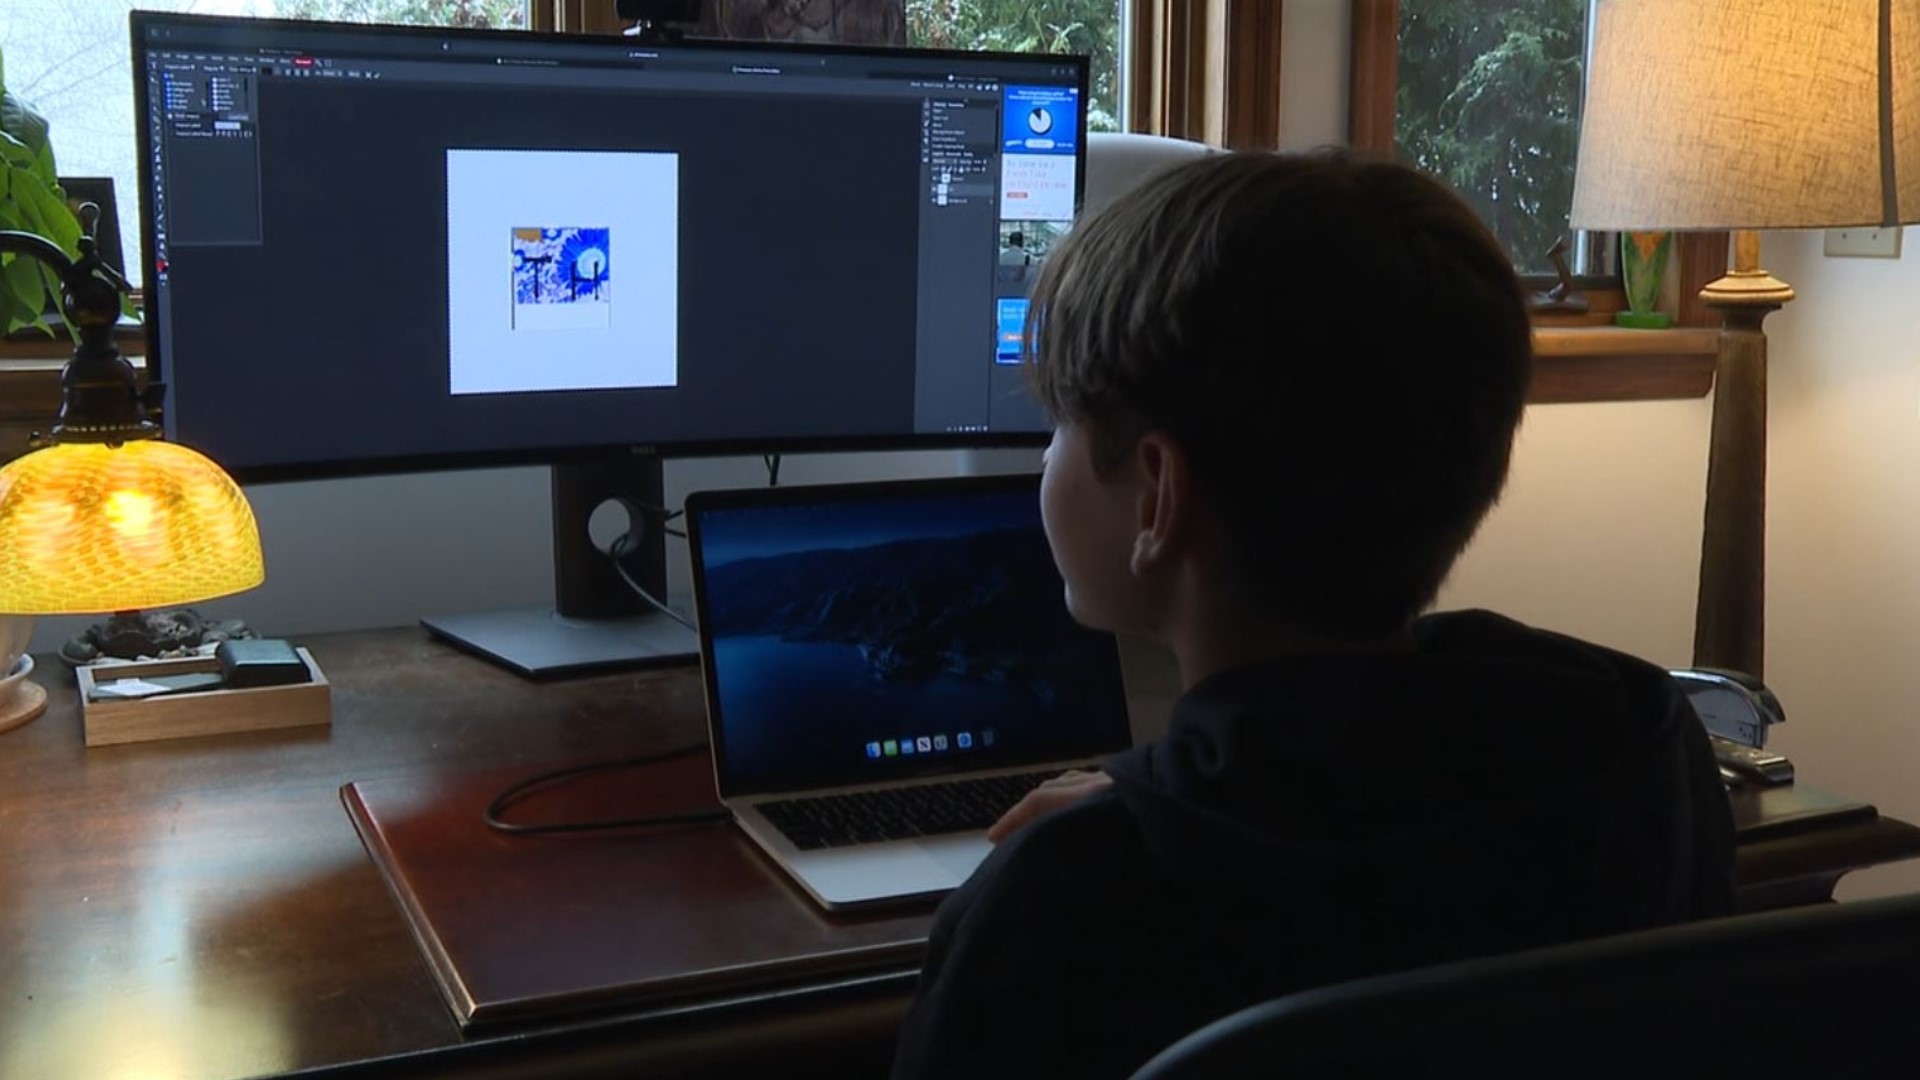 A seventh-grader from our area started his own side hustle online. In just a few short weeks of launching his online business, he's already making money.